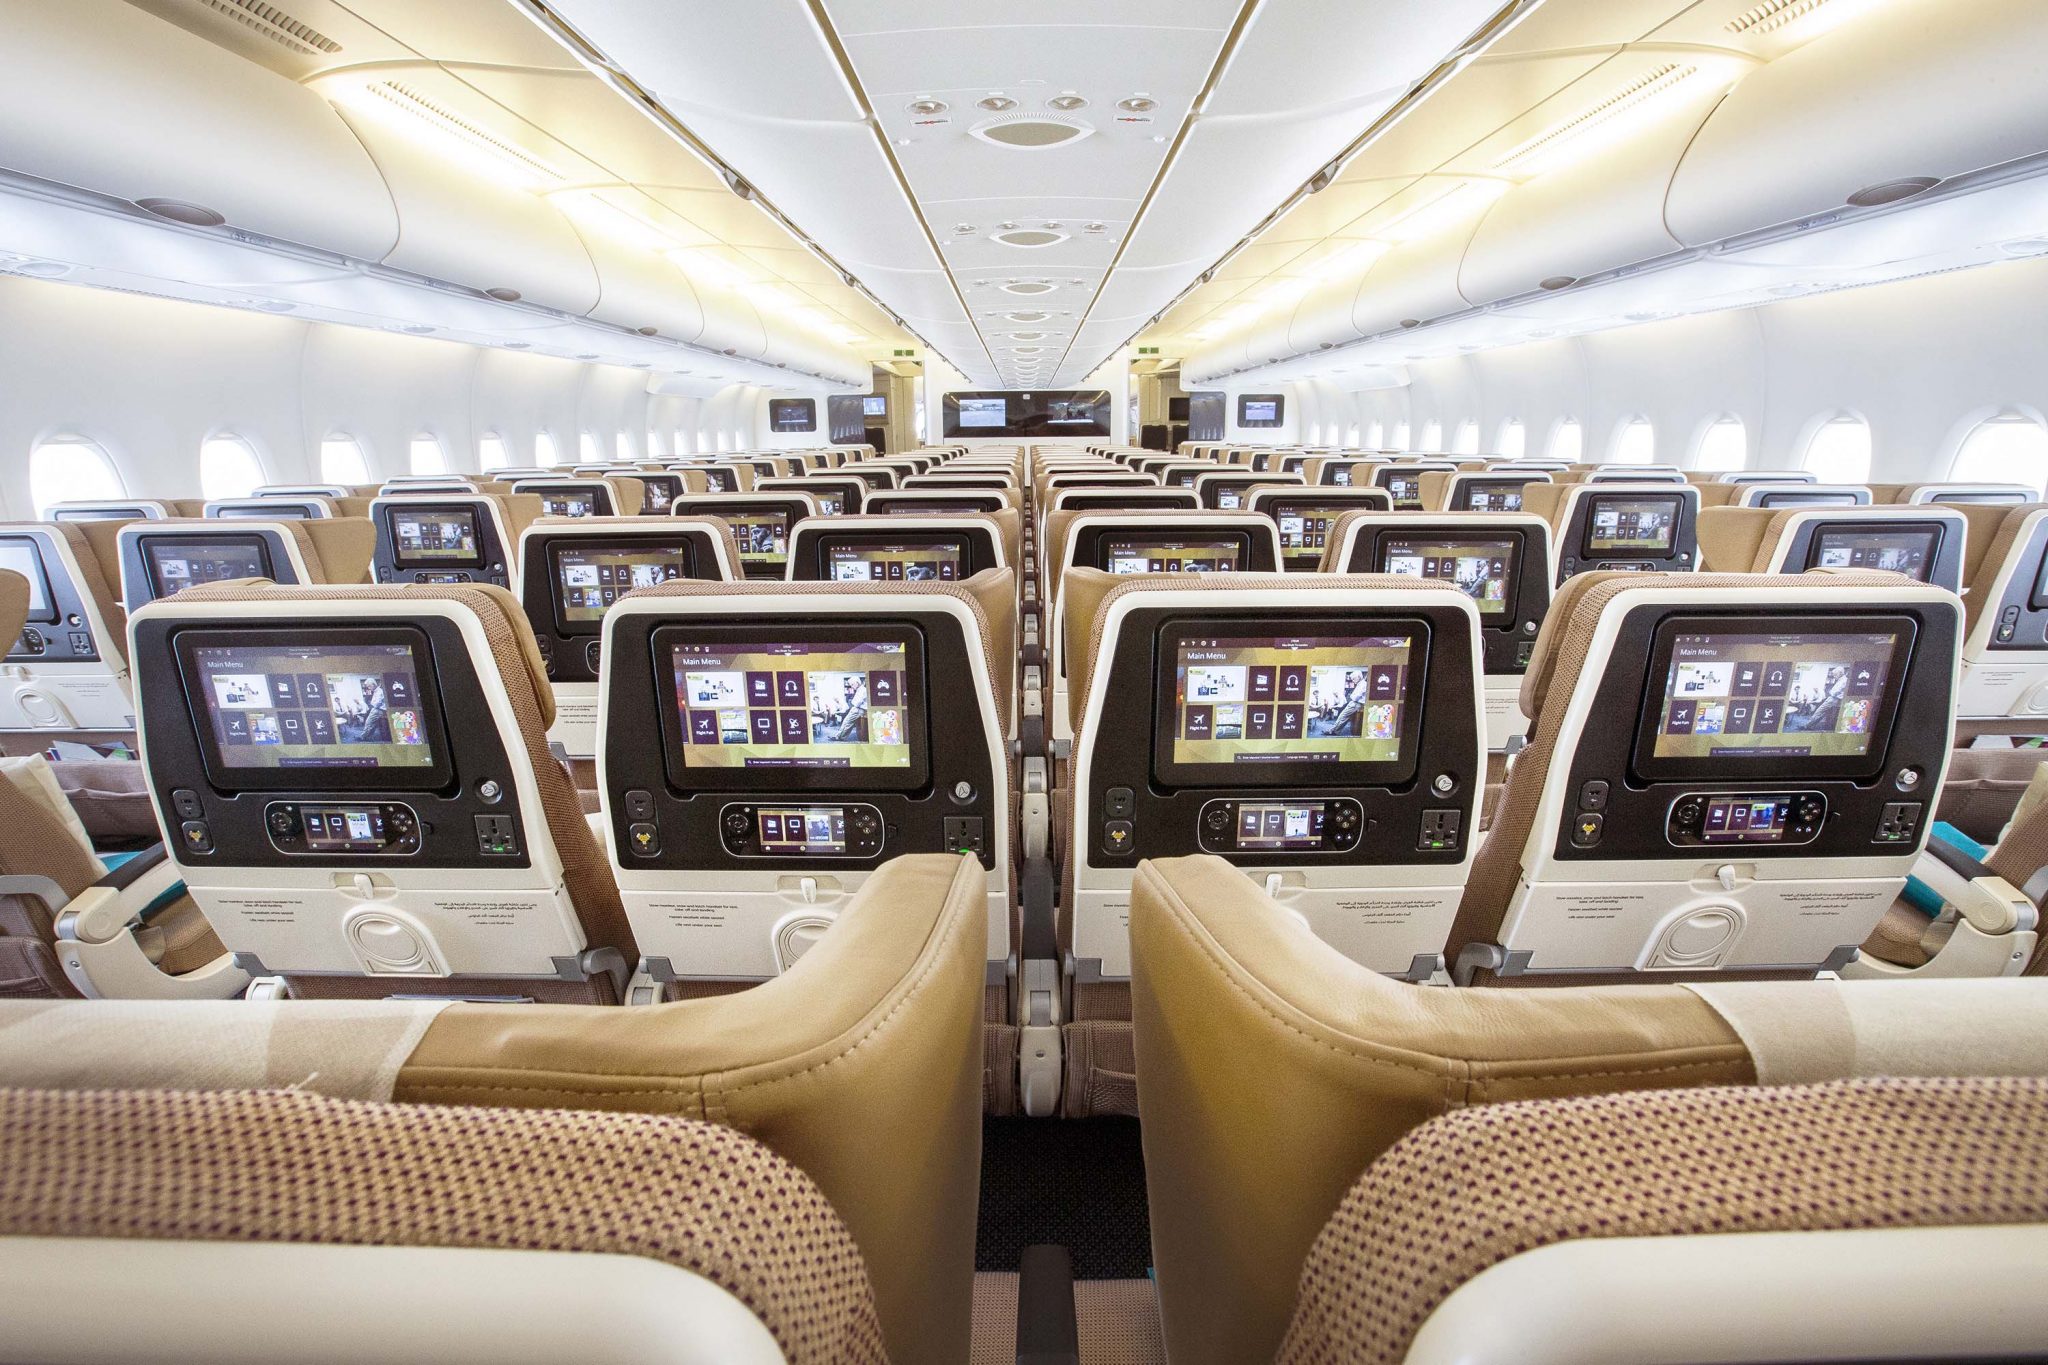 Is This The Most Expensive Economy Class Airfare in History?